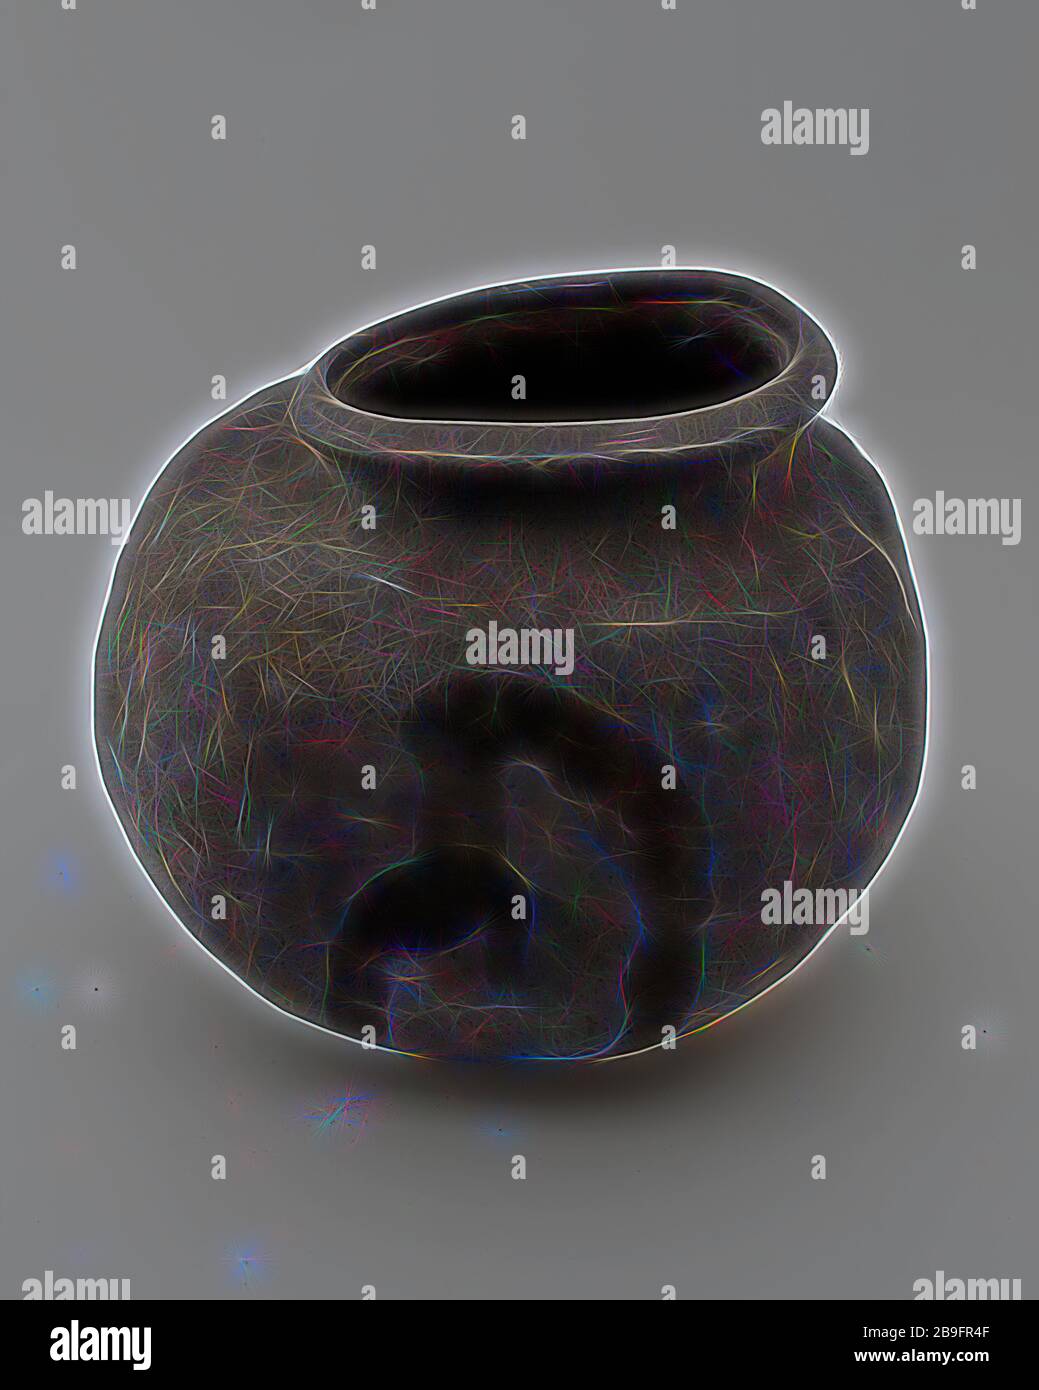 https://c8.alamy.com/comp/2B9FR4F/gray-earthenware-ball-pot-distorted-misfires-ball-jar-pot-holder-soil-find-ceramic-pottery-hand-formed-baked-pottery-ball-pot-gray-shard-scraped-pottery-round-body-without-any-support-or-foot-curled-up-top-misbaksel-the-pot-is-deformed-the-top-edge-has-fallen-out-of-the-model-in-the-belly-is-big-dent-in-which-hole-dark-stripes-on-the-pot-are-probably-caused-by-recent-pollution-with-oil-or-similar-archeology-indigenous-pottery-cooking-food-prepare-store-save-2B9FR4F.jpg